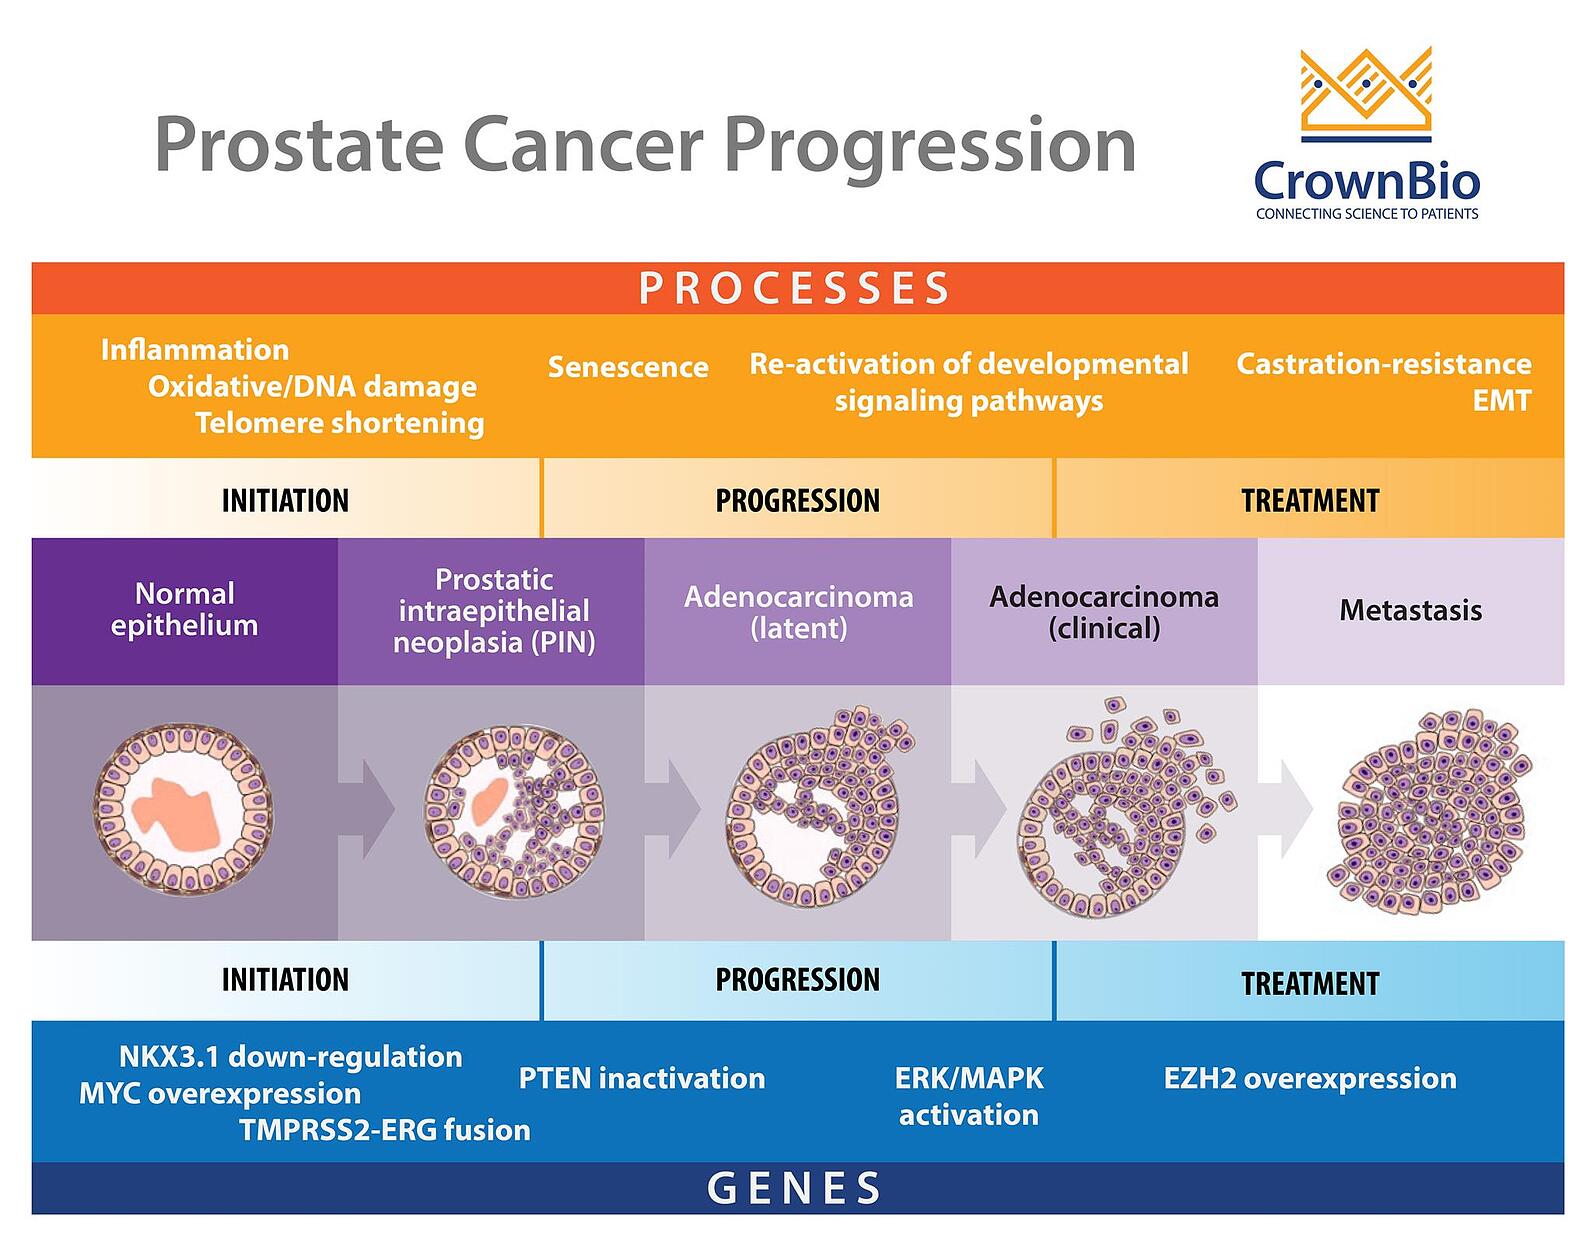 Why Are Prostate Cancer Preclinical Models Hard to Develop?